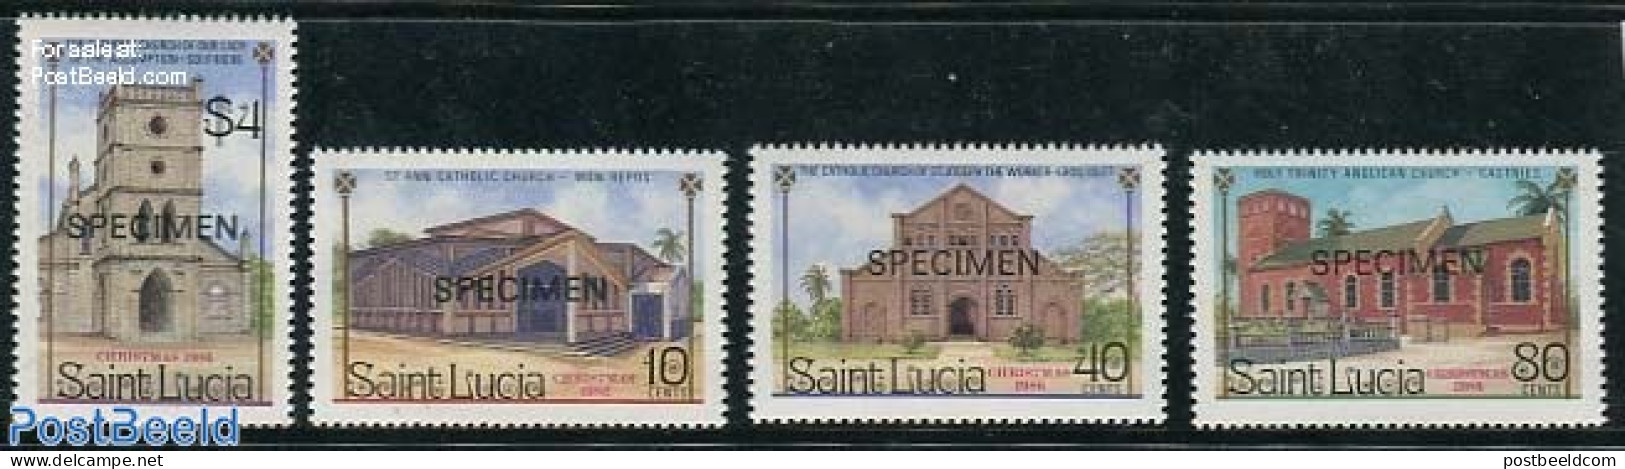 Saint Lucia 1986 Christmas 4v, SPECIMEN, Mint NH, Religion - Christmas - Churches, Temples, Mosques, Synagogues - Noël